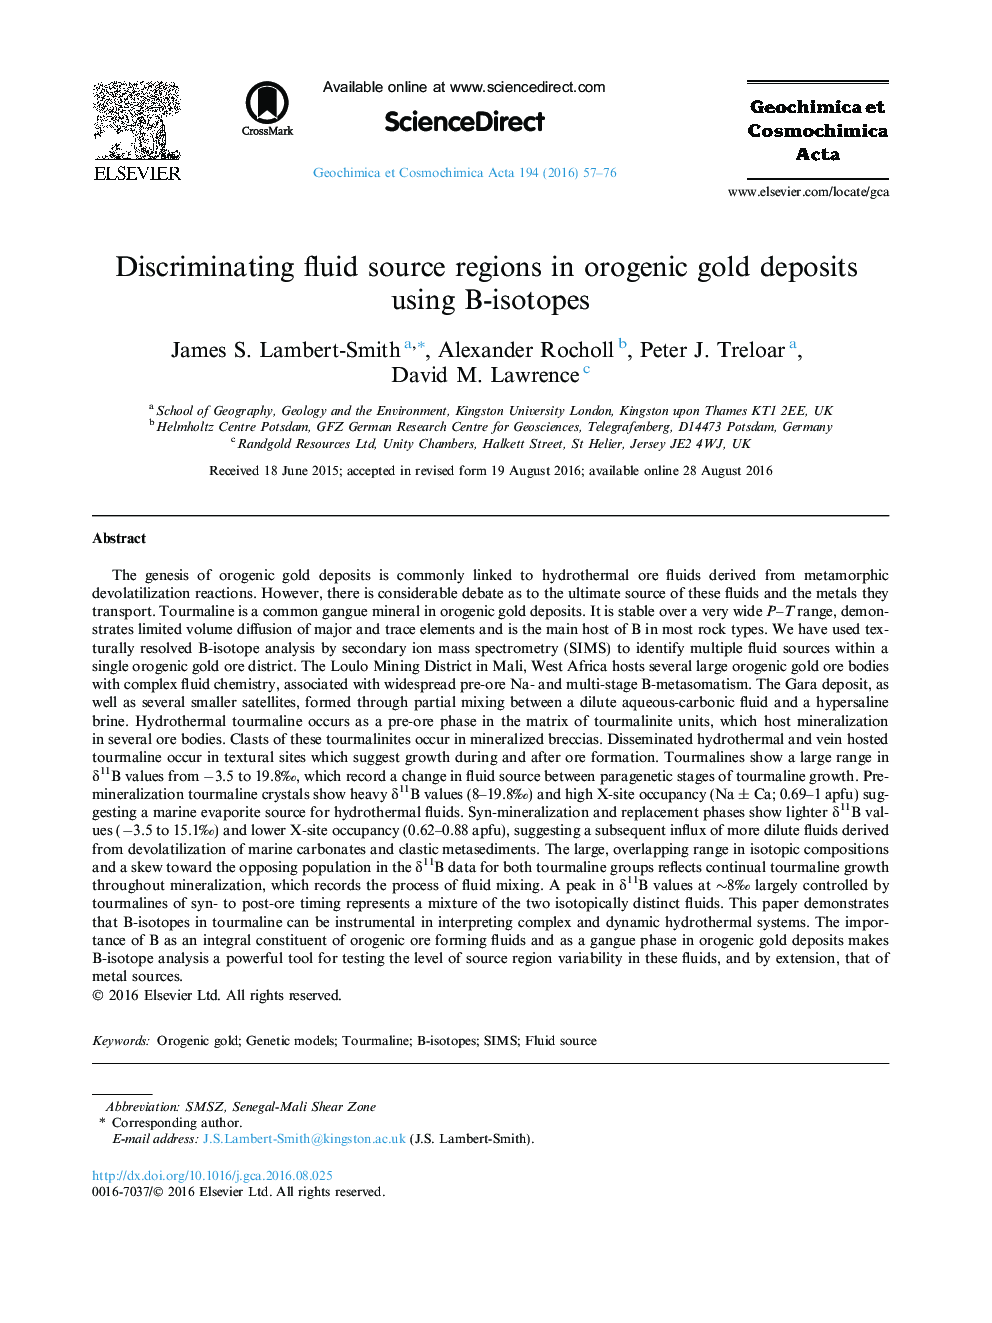 Discriminating fluid source regions in orogenic gold deposits using B-isotopes